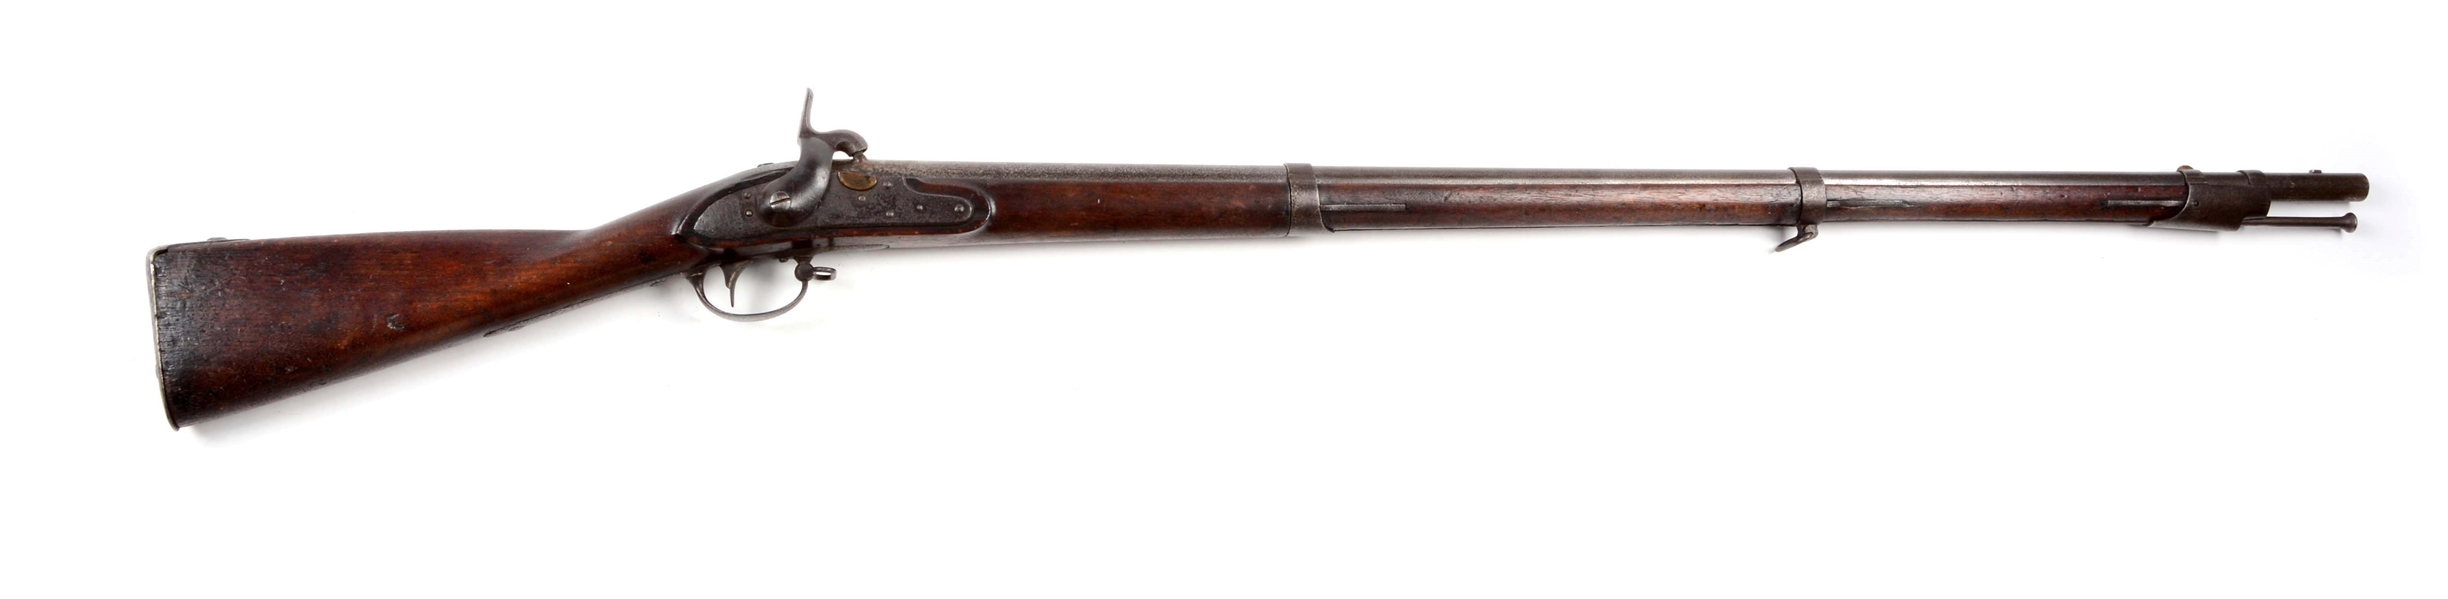 (A) U.S. MODEL 1816 TYPE III PERCUSSION CONVERSION MUSKET BY HARPERS FERRY.